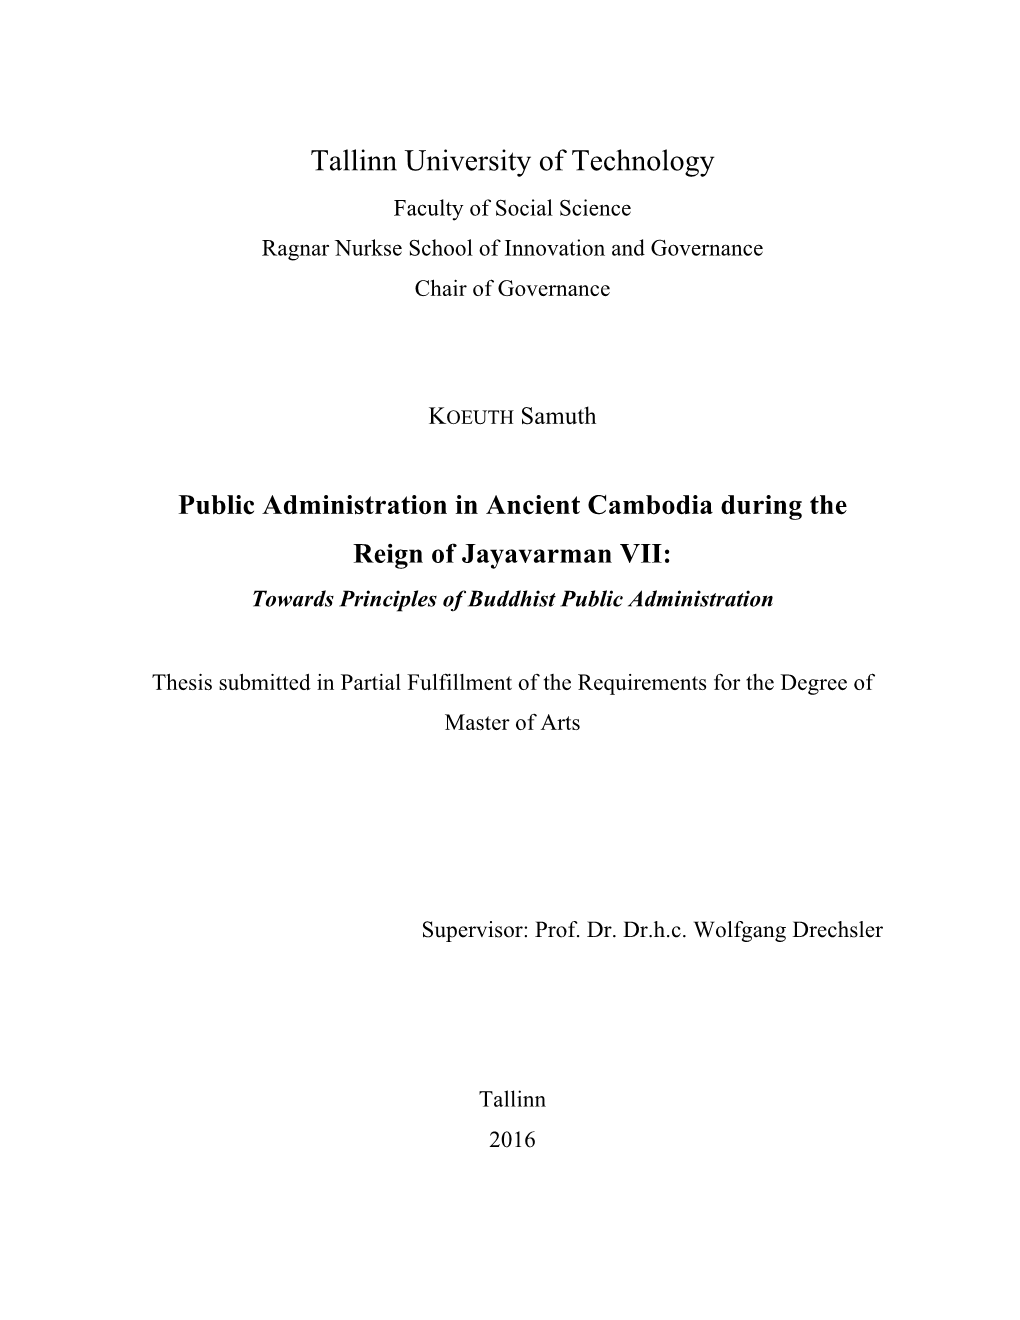 Public Administration in Ancient Cambodia During the Reign of Jayavarman VII: Towards Principles of Buddhist Public Administration